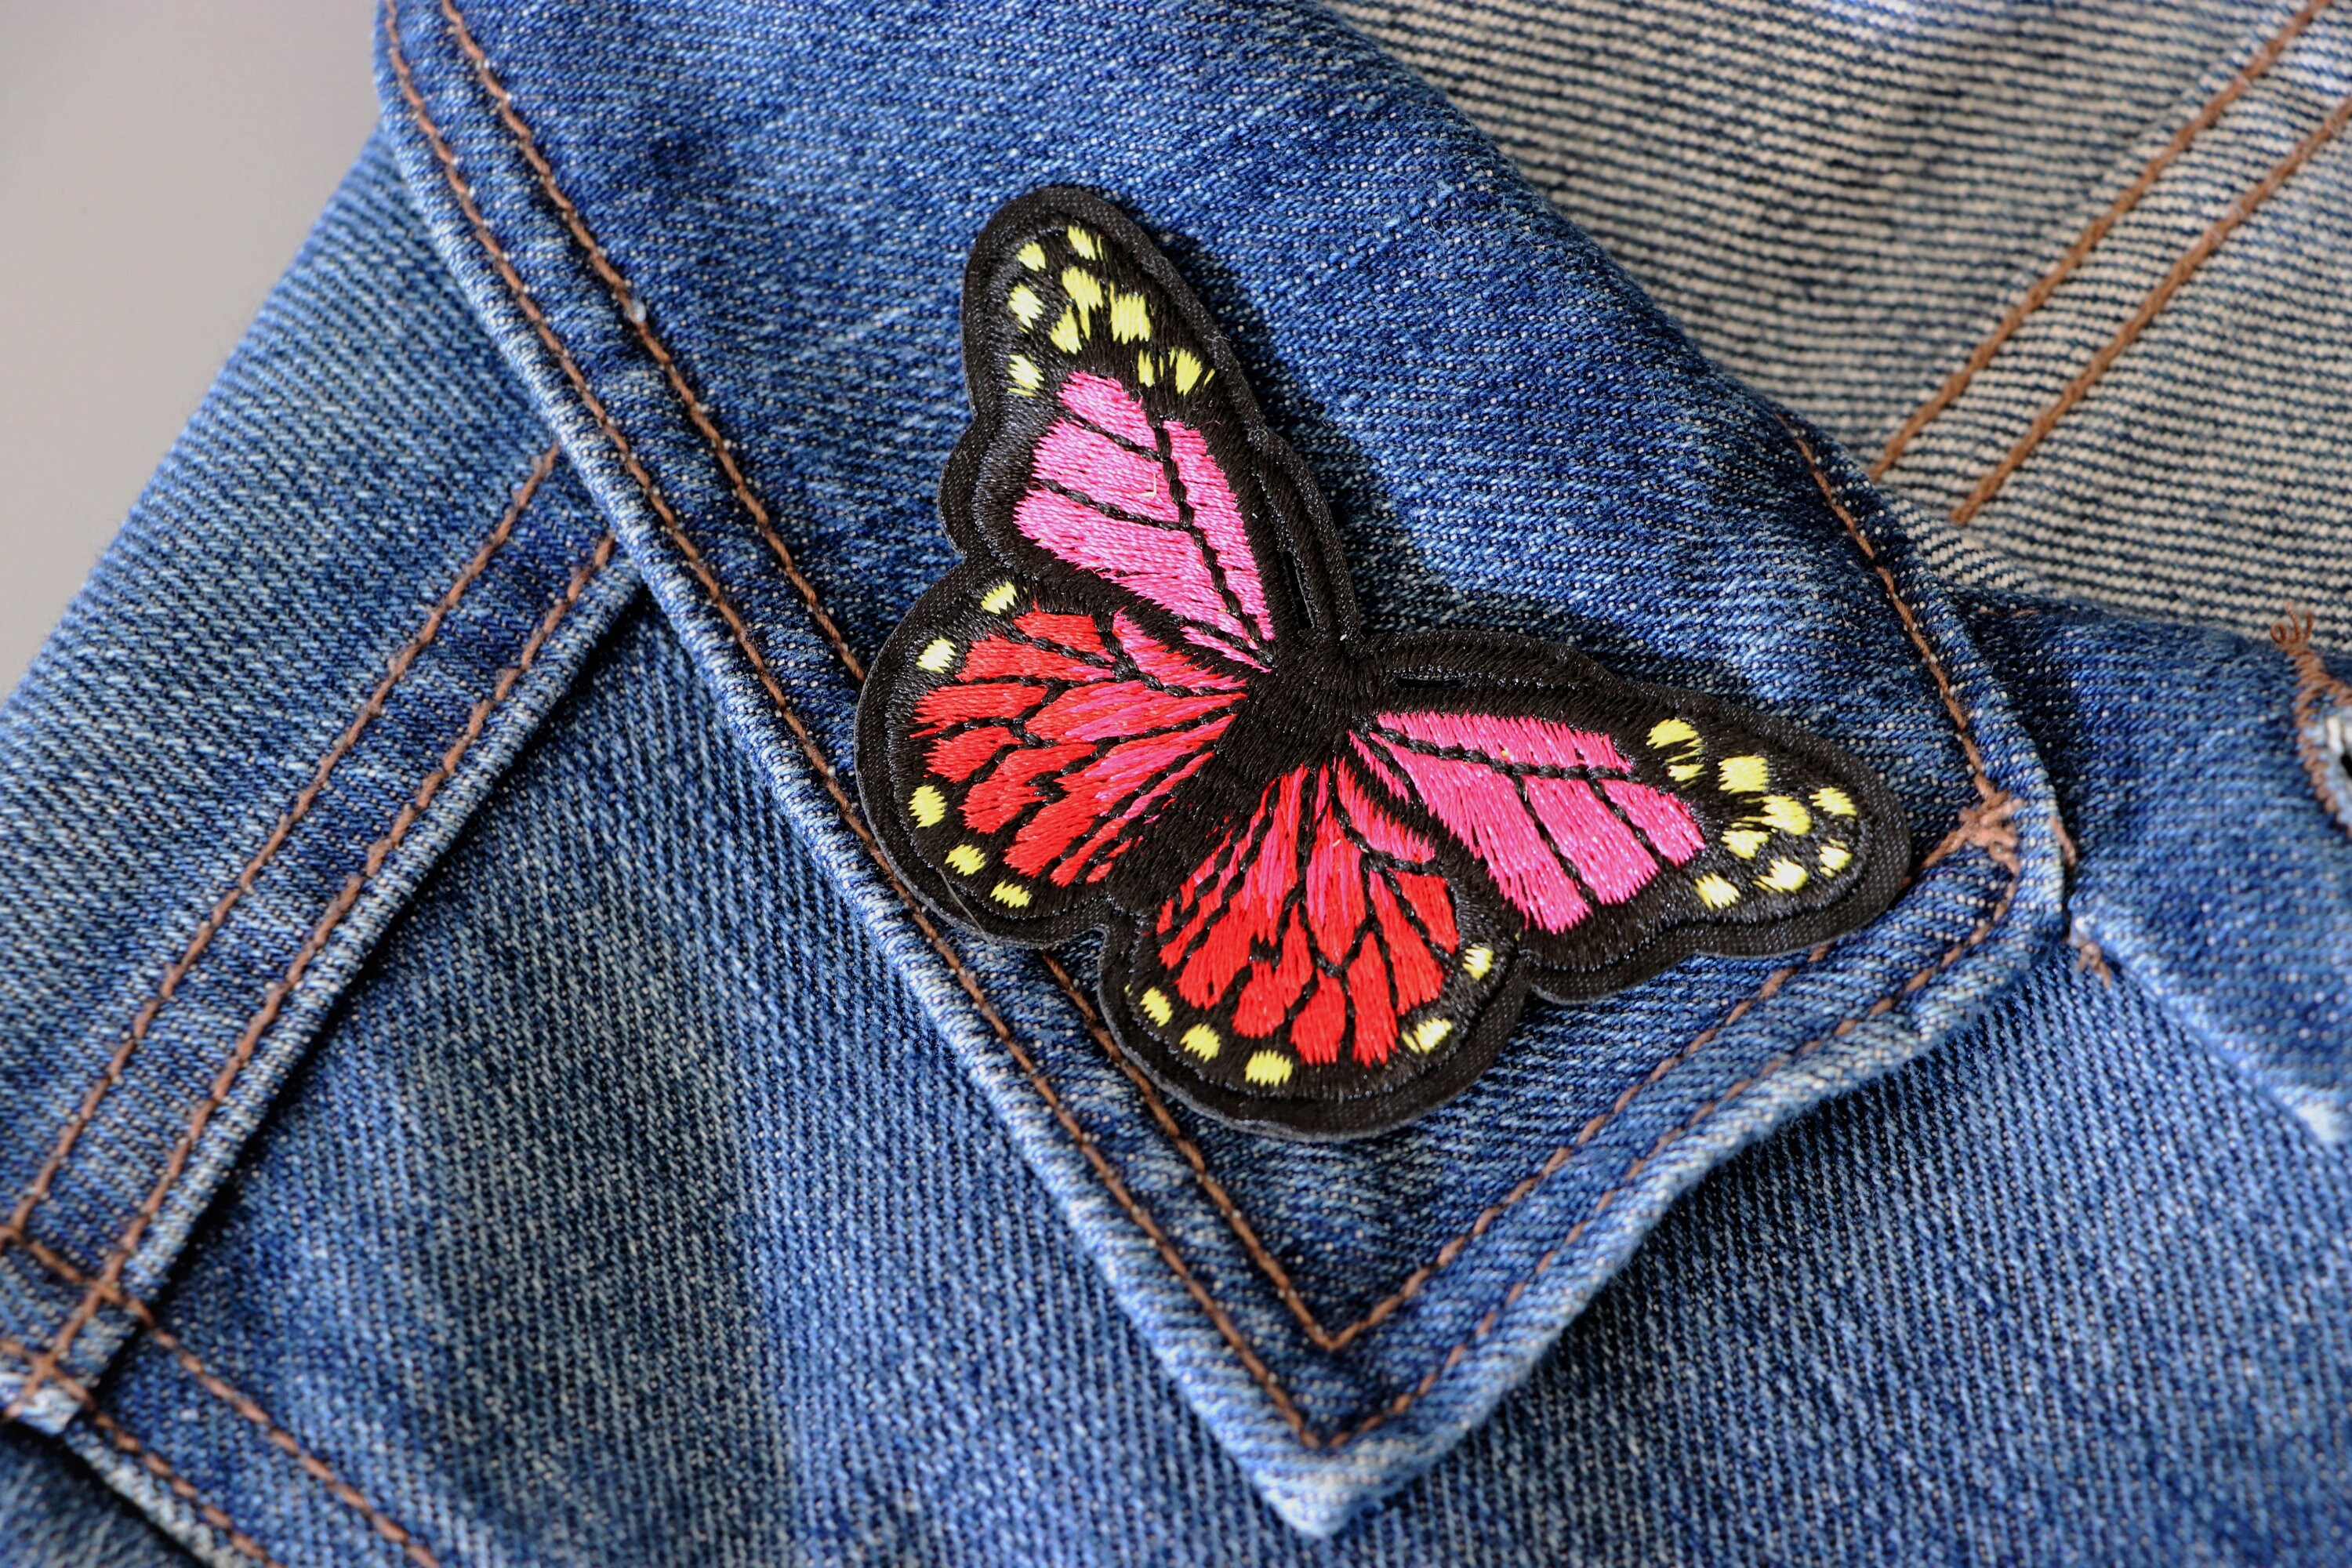 Embroidered Butterfly Patch iron On Unique 90's Vibe Aesthetic Patches  Embelish Your Clothes: Jeans, Backpacks, Denim Jackets, Hats 